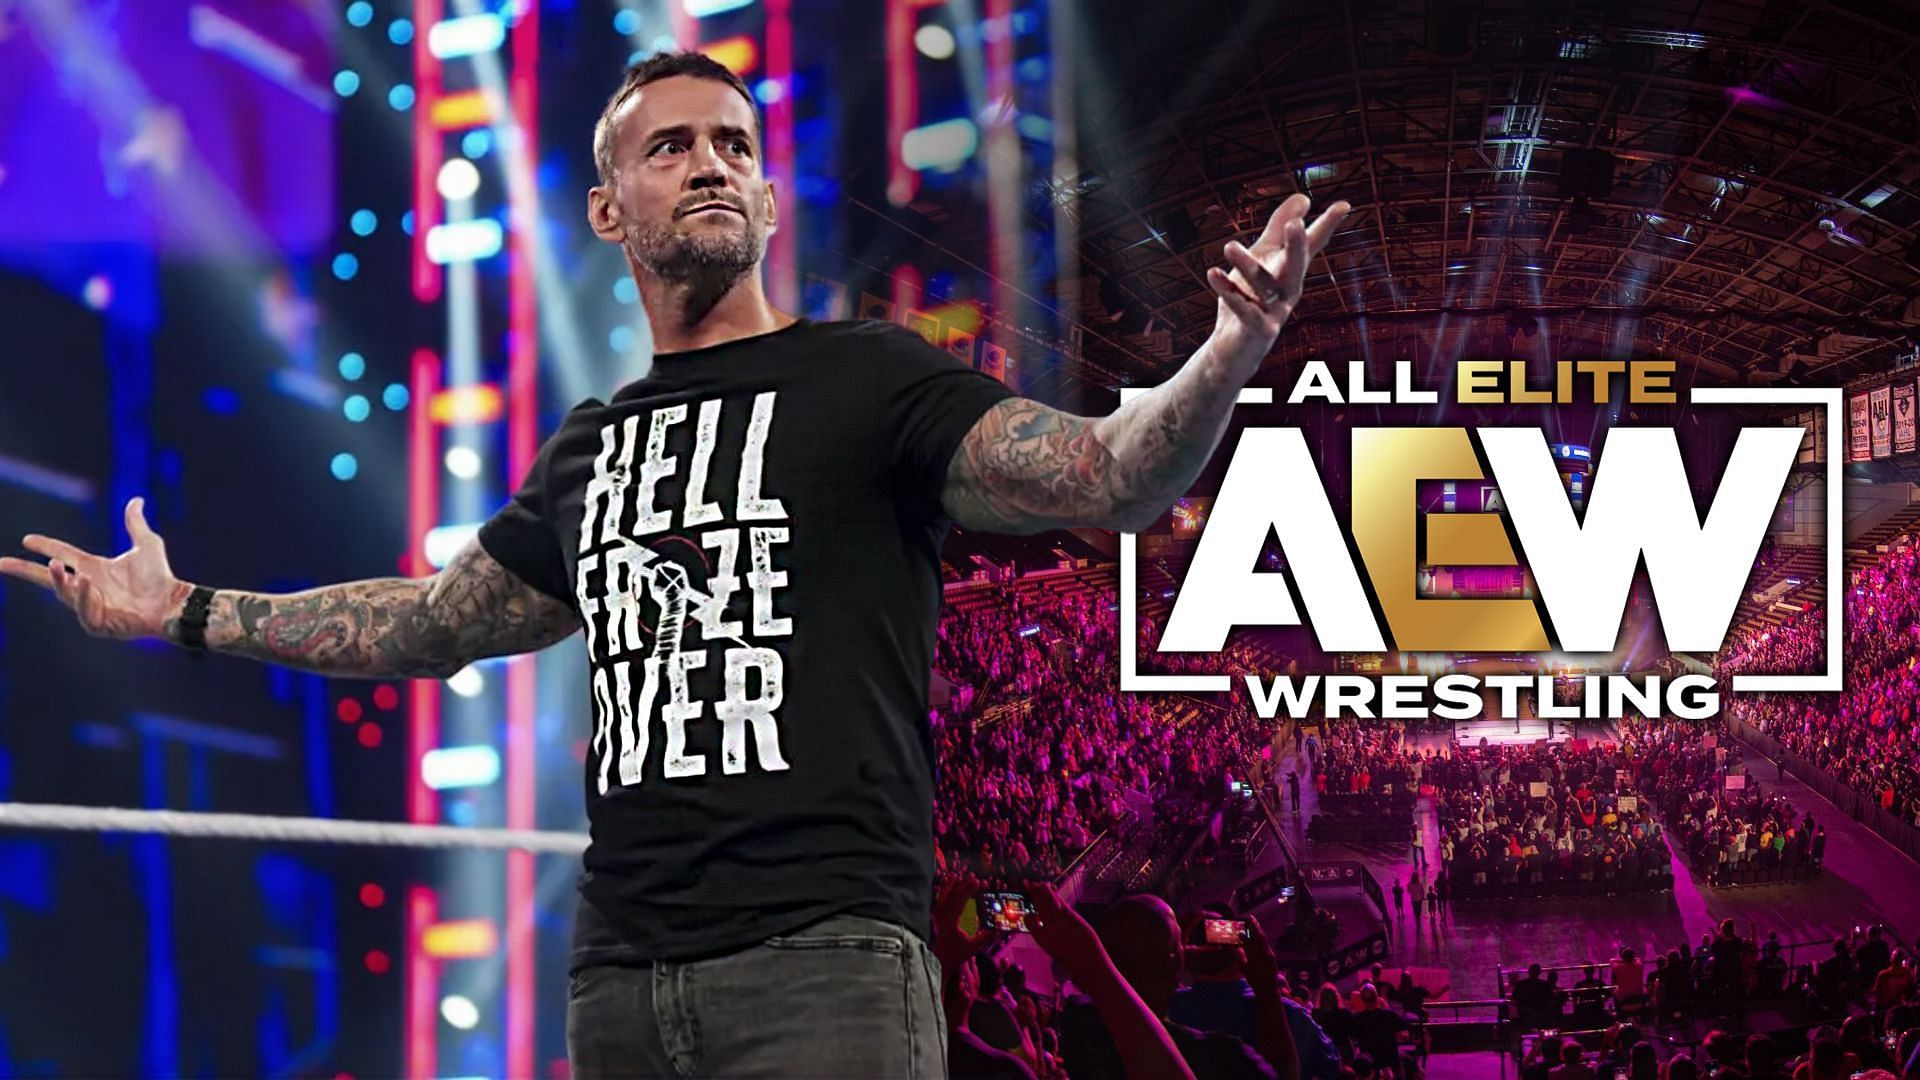 CM Punk recently returned to WWE